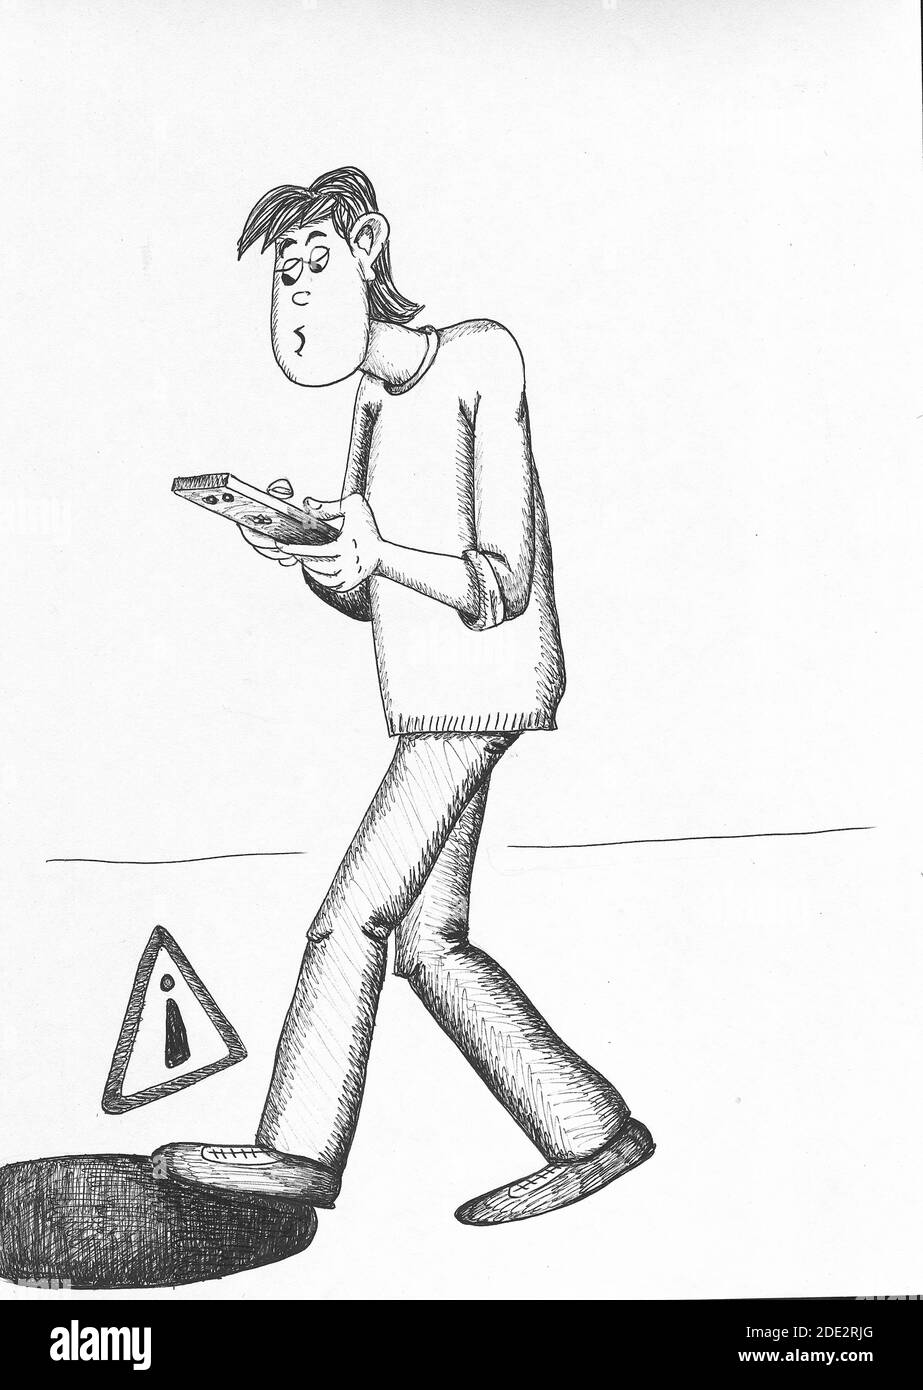 Distracted boy looking at his smartphone and walking on an open gutter. Illustration. Stock Photo